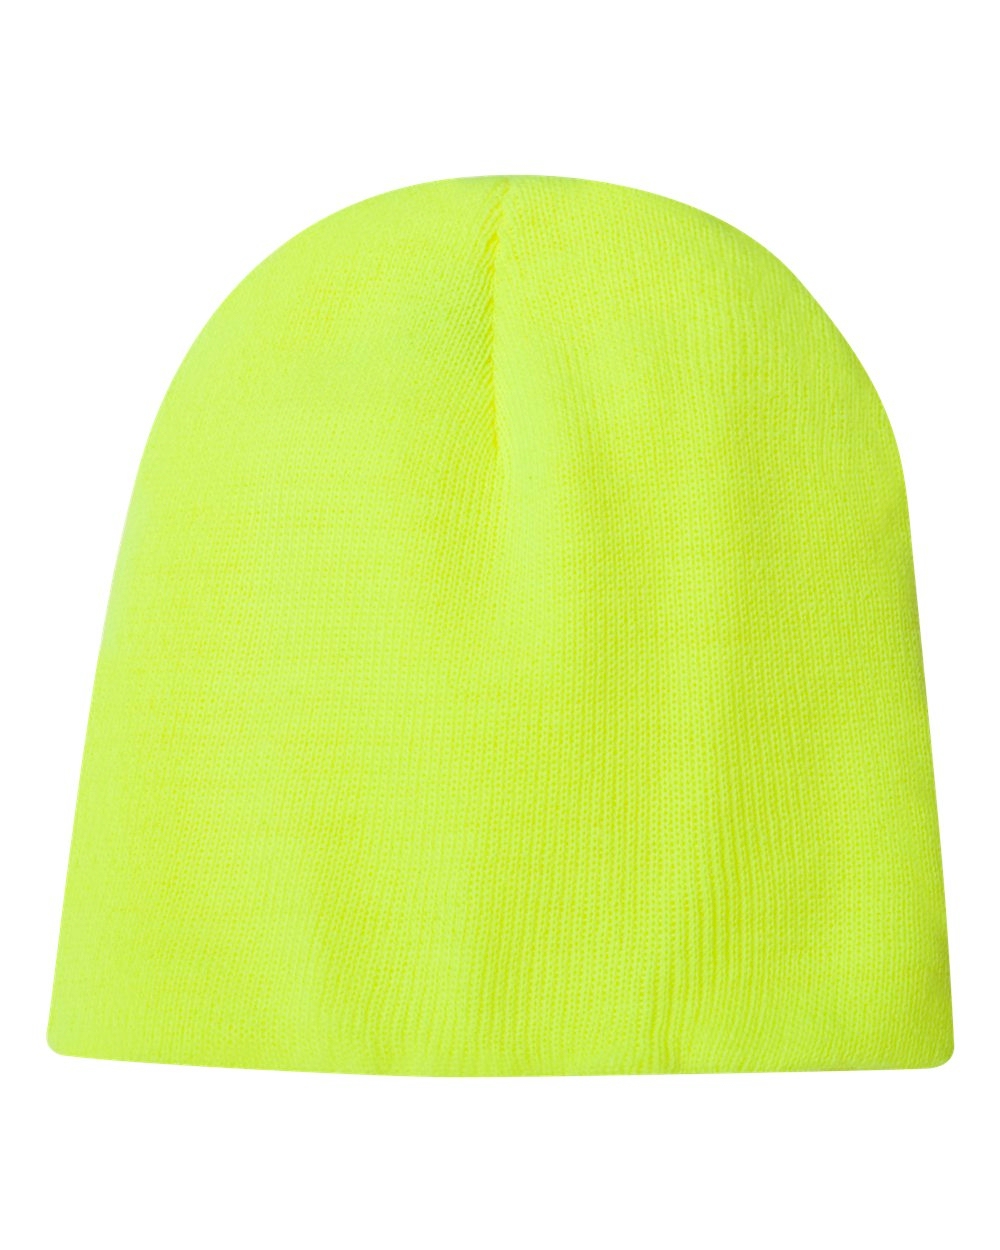 8.5" Knit Beanie Embroidery Blanks - Safety Lime